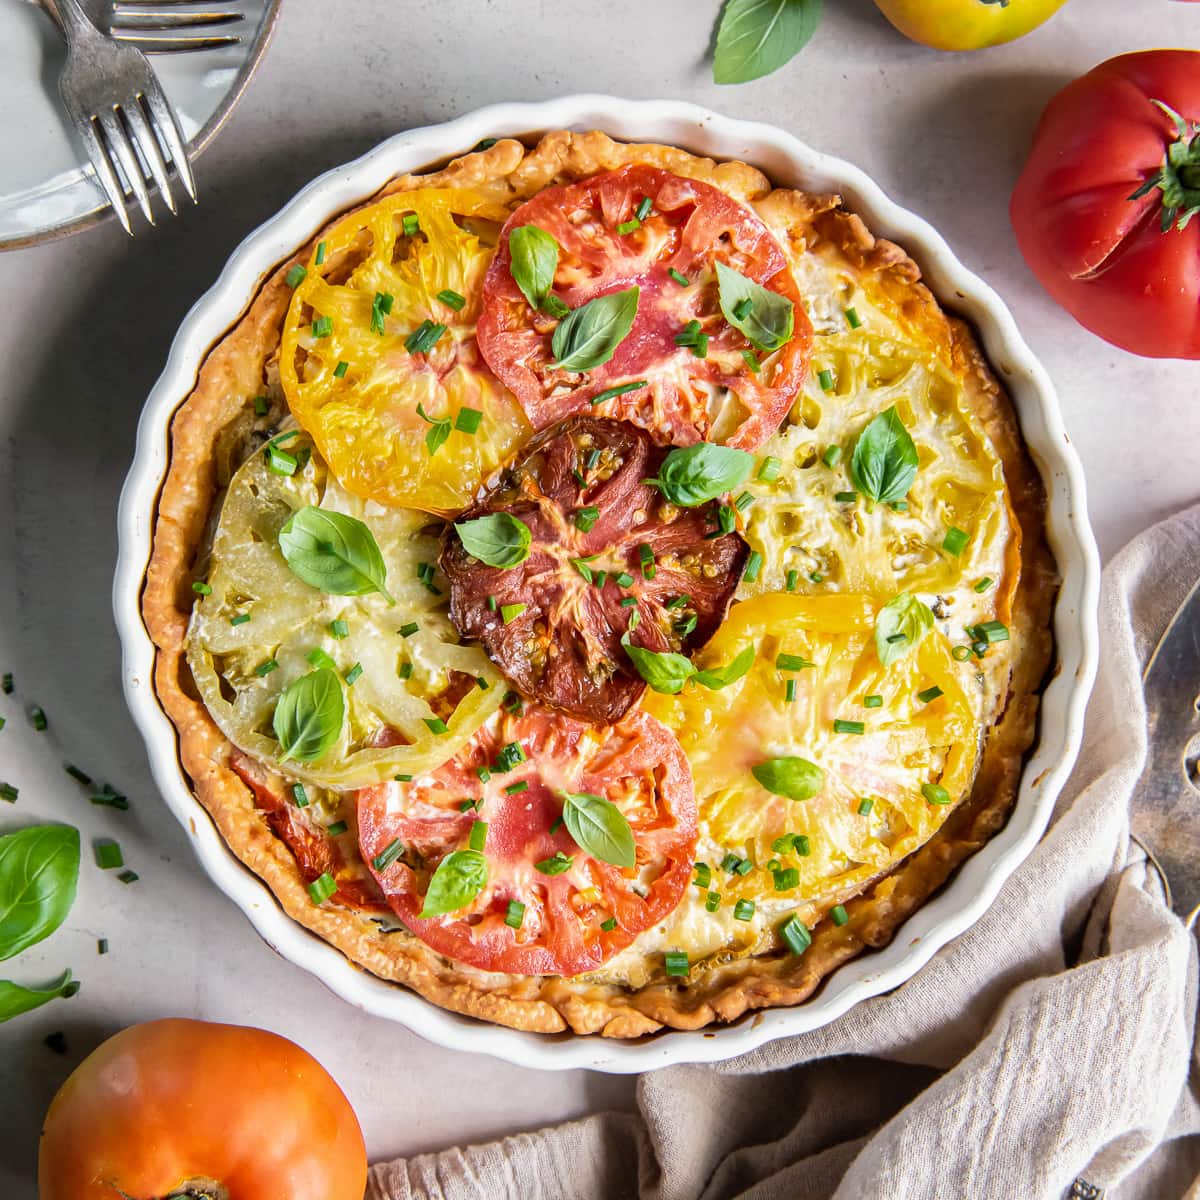 tomato pie with heirloom tomato slices on top and basil garnish.